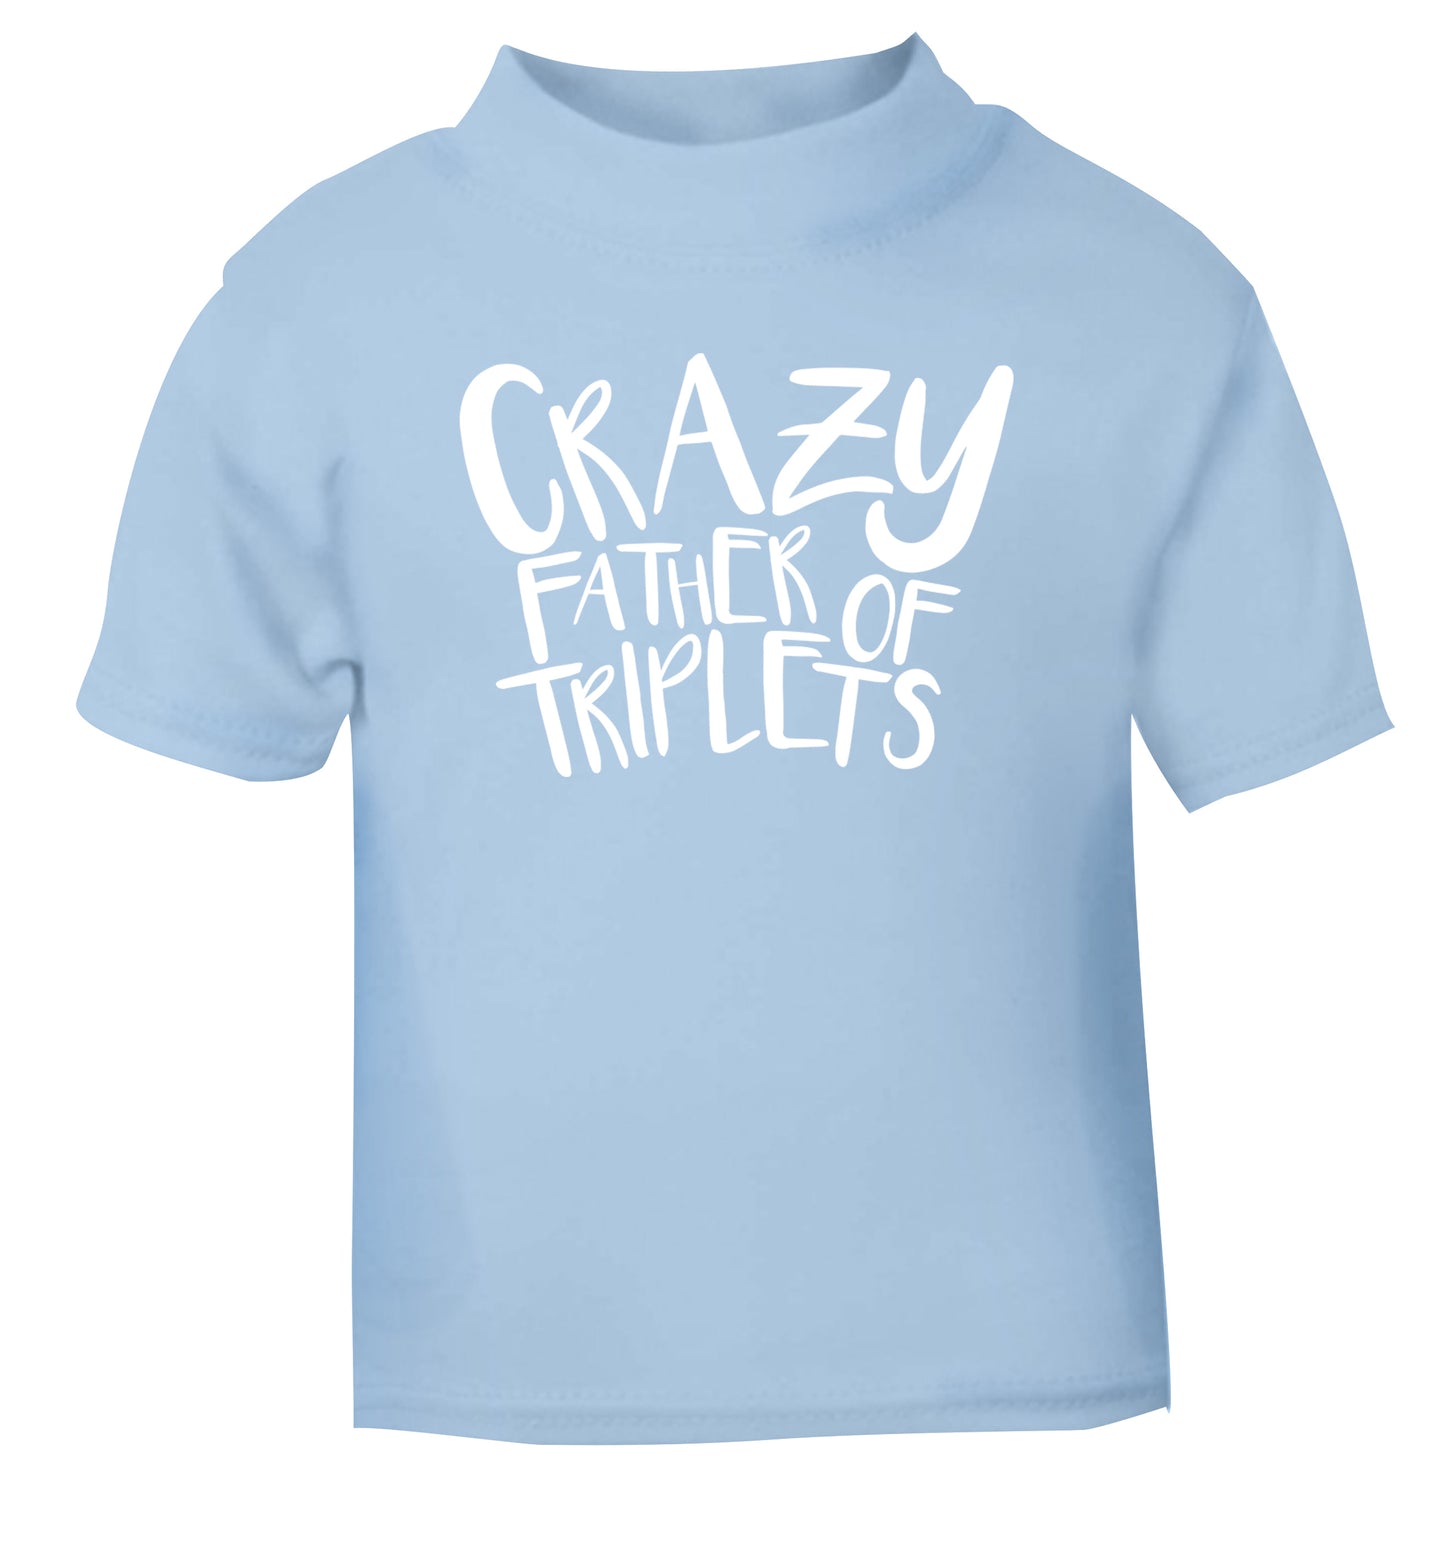 Crazy father of triplets light blue Baby Toddler Tshirt 2 Years